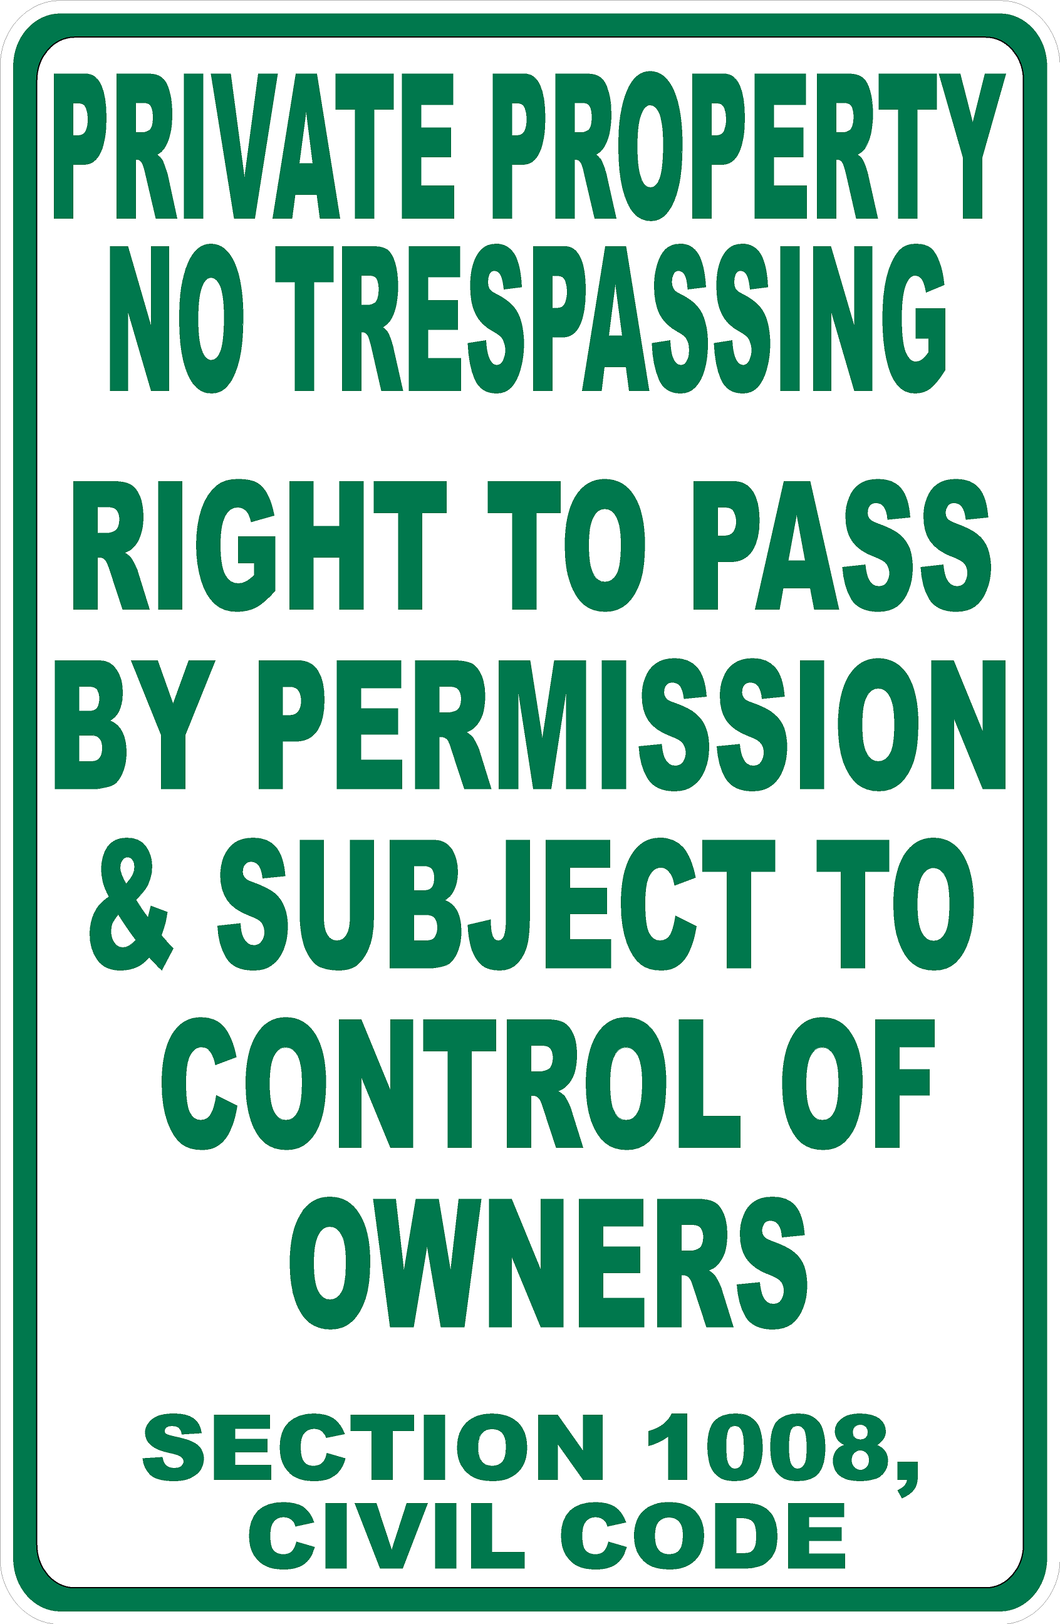 Private Property No Trespassing Right to Pass by Permission Subject Control of Owners Sign Vertical Version